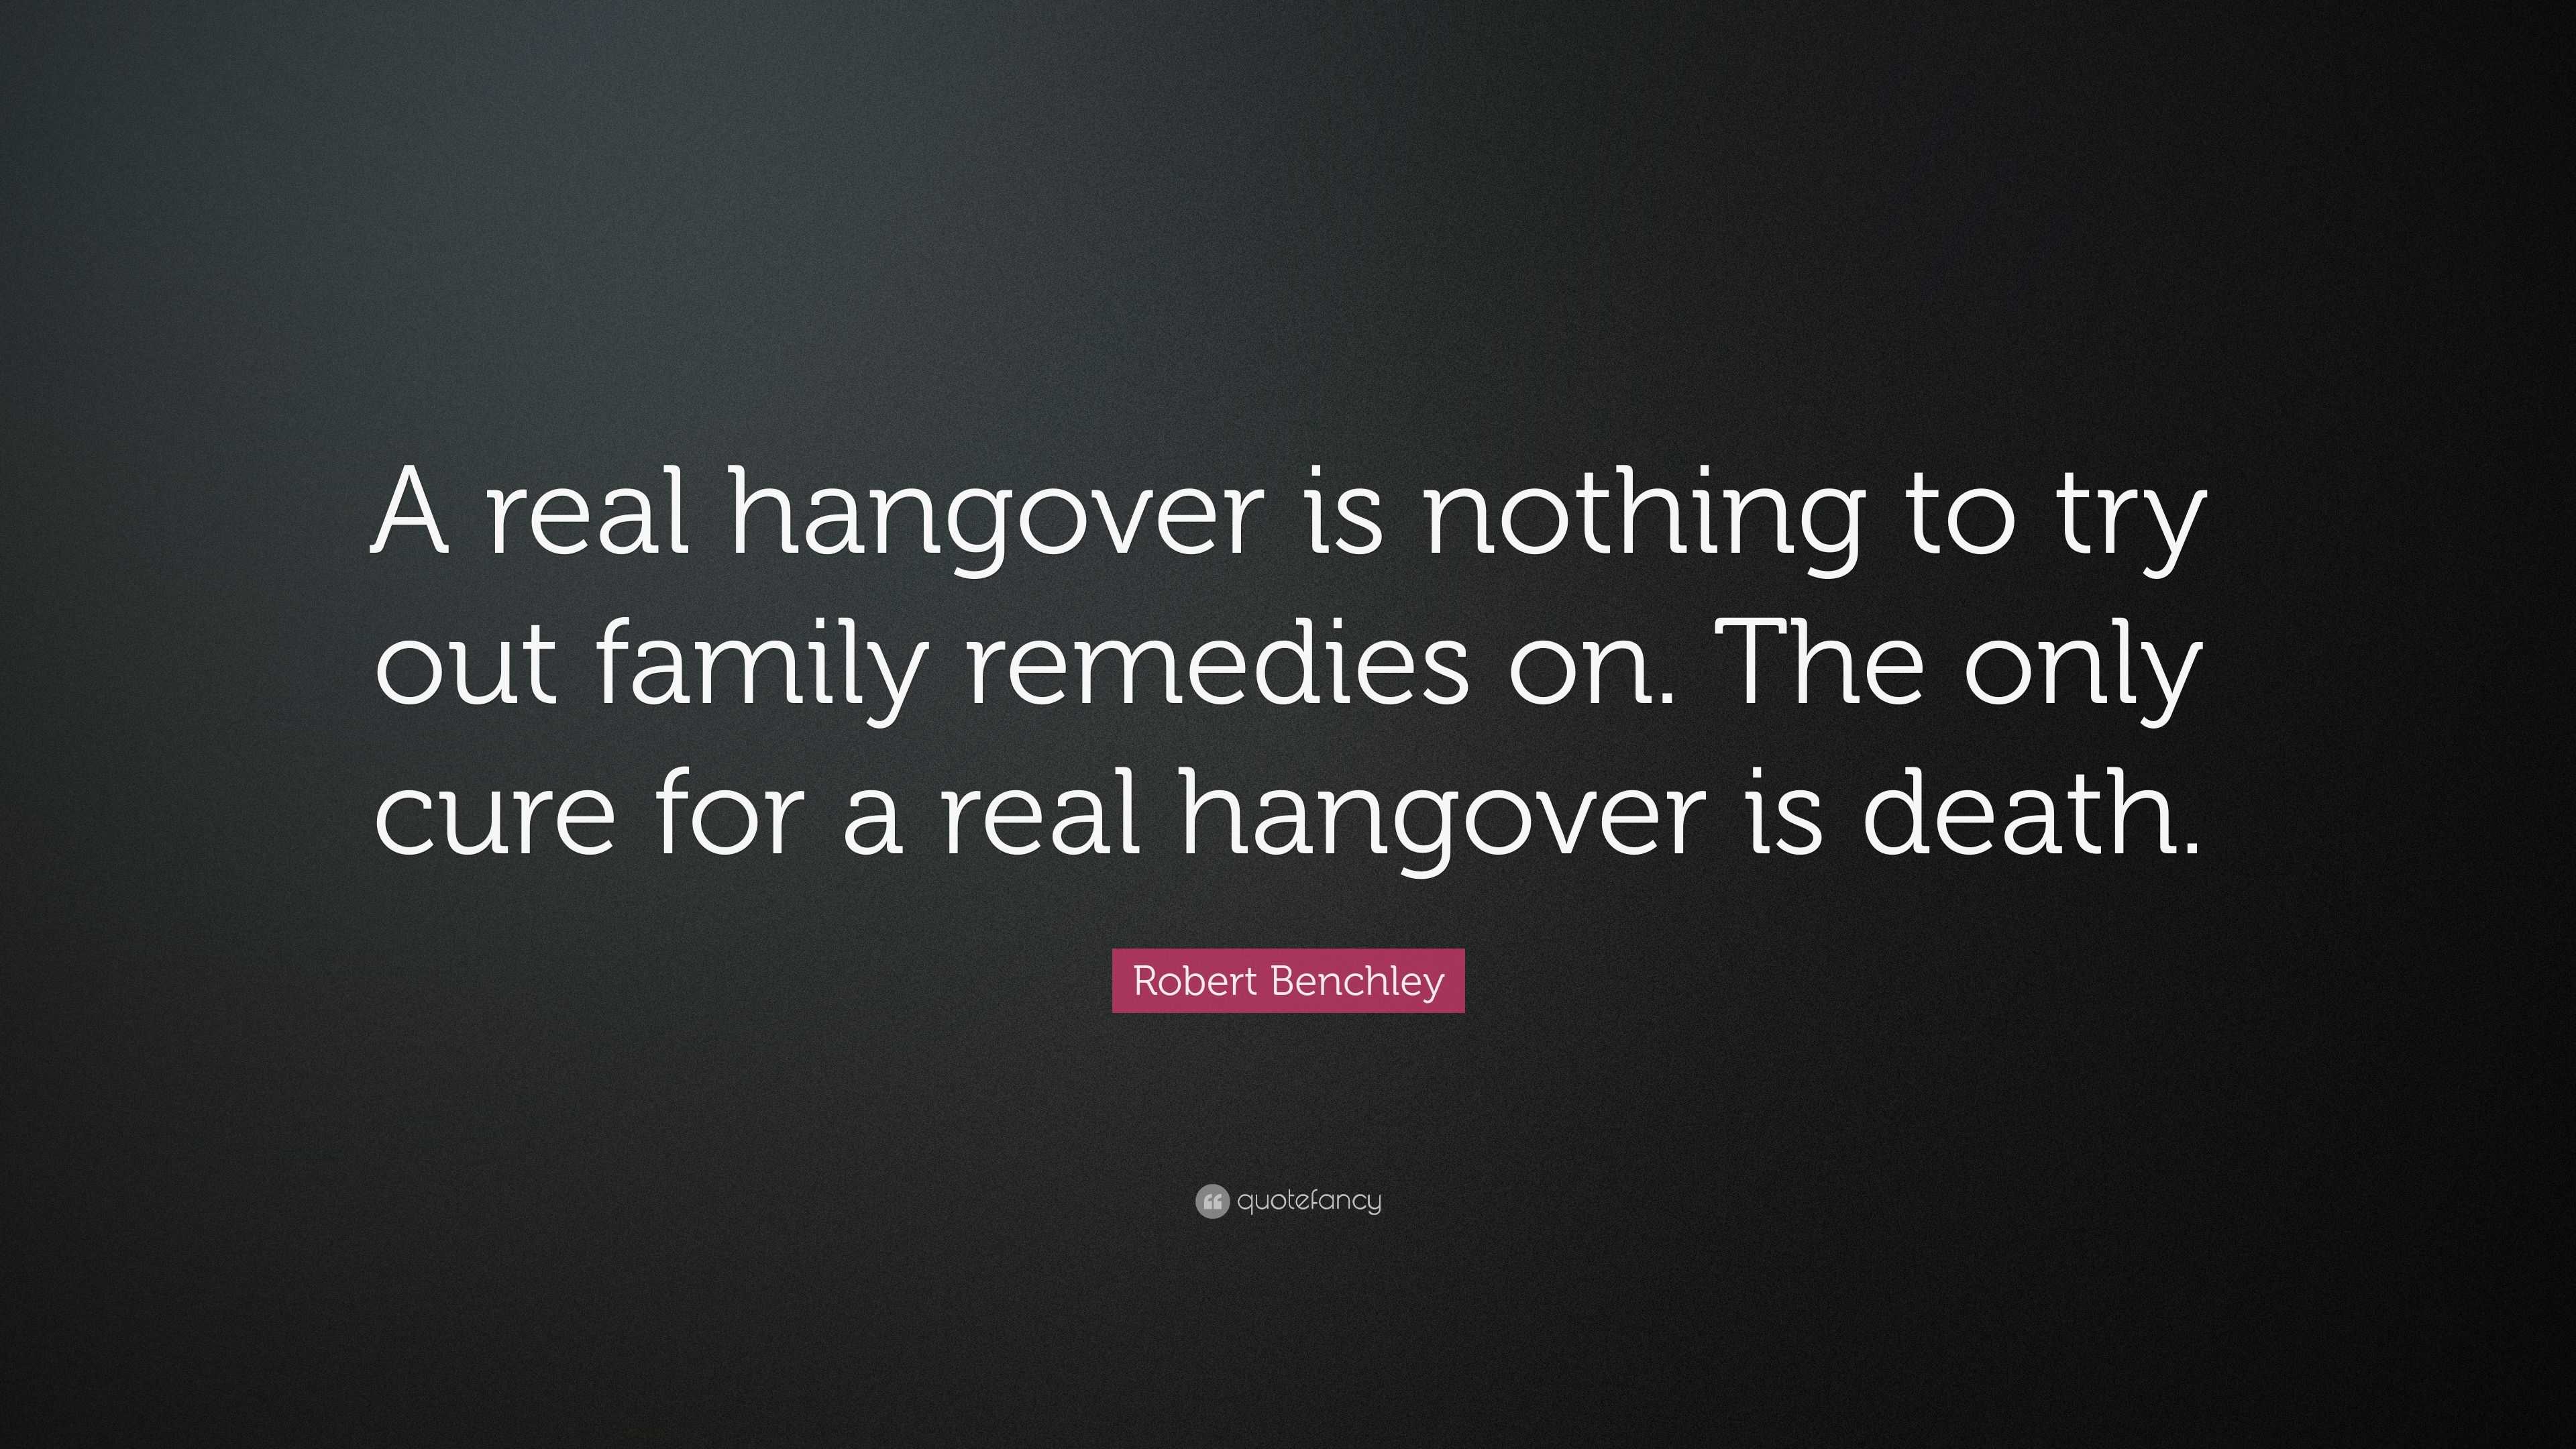 Social Circle: What's your hangover cure?